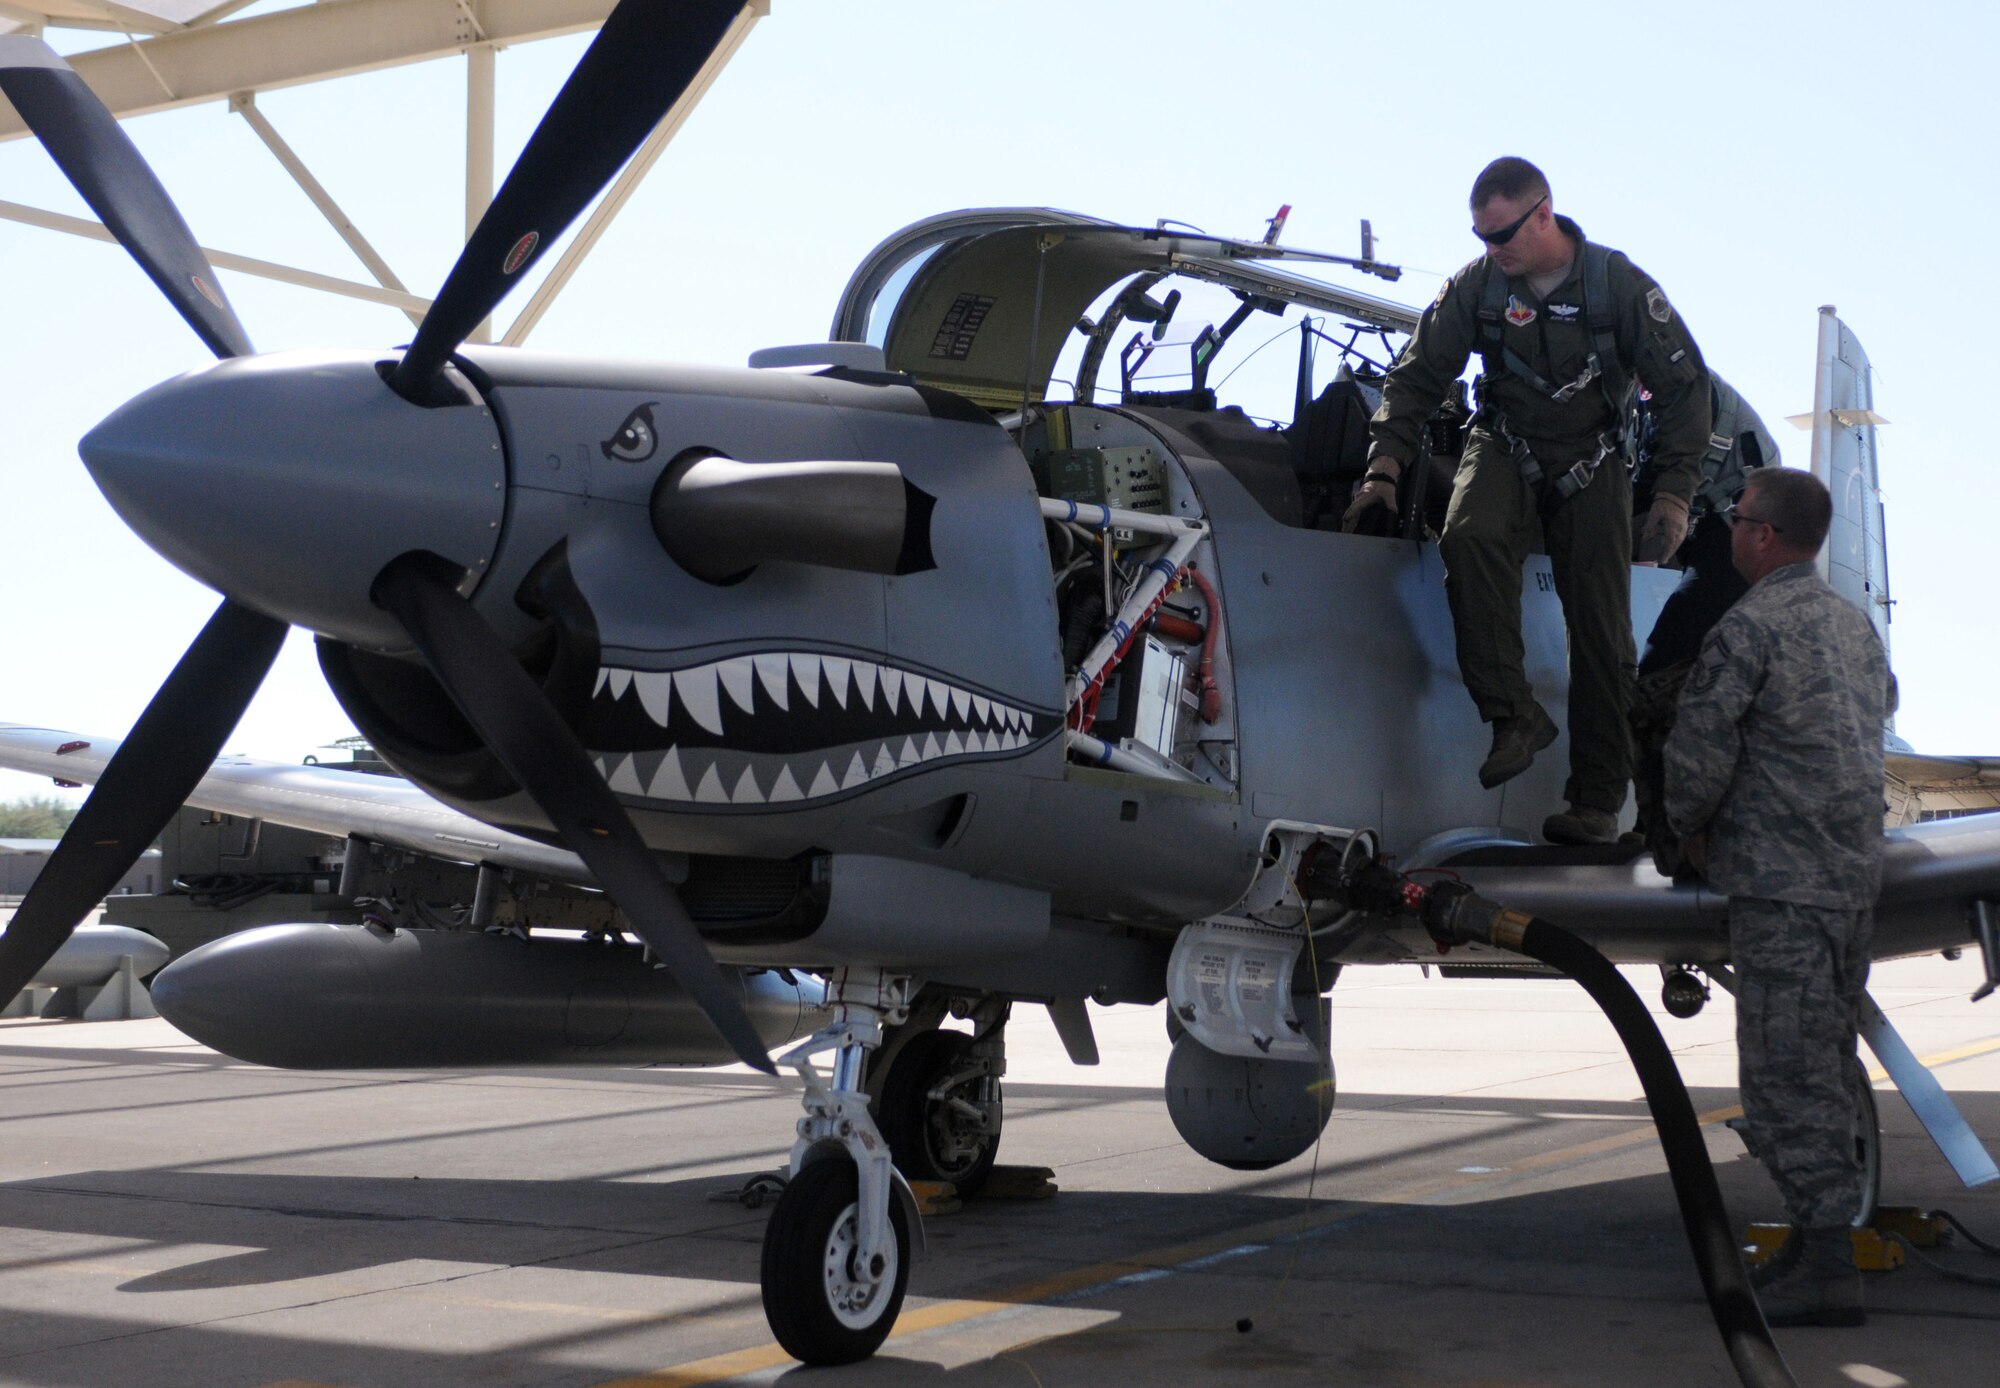 Maj. Jesse Smith, an A-10 pilot from the 422nd Test and Evaluation Squadron at Nellis Air Force Base, Nev., exits an AT-6C at Davis-Monthan Air Force Base, Ariz., after testing the light attack aircraft’s ability to perform a combat search and rescue mission Oct. 7. Major Smith is one of several pilots invited by the Air National Guard, Air Force Reserve Command Test Center to fly the experimental airplane this month and provide recommendations for improving its capability. (Air Force photo by Maj. Gabe Johnson)